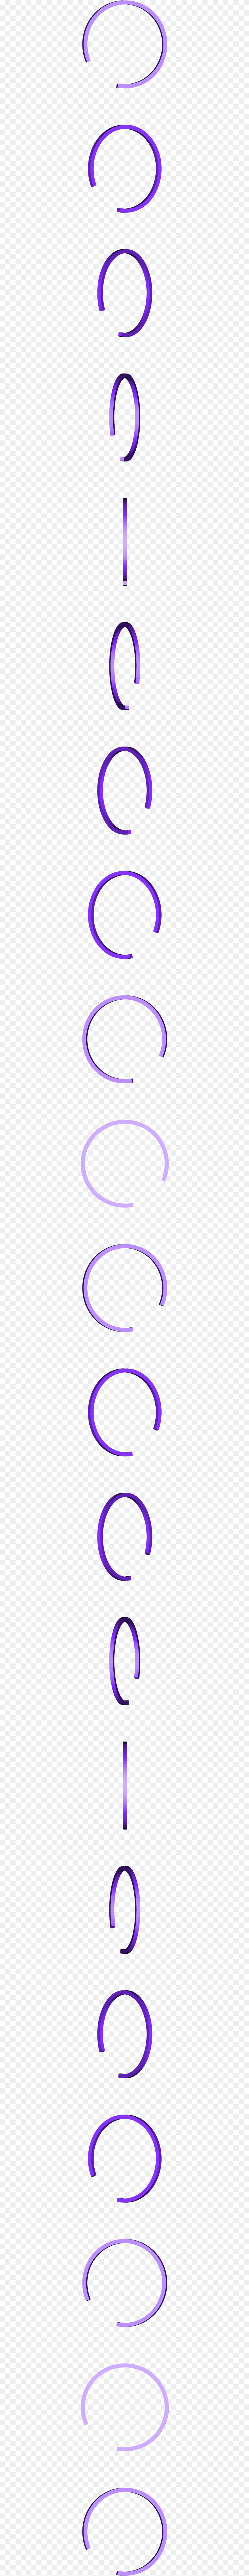 Circle, Coil, Light, Purple, Spiral Png